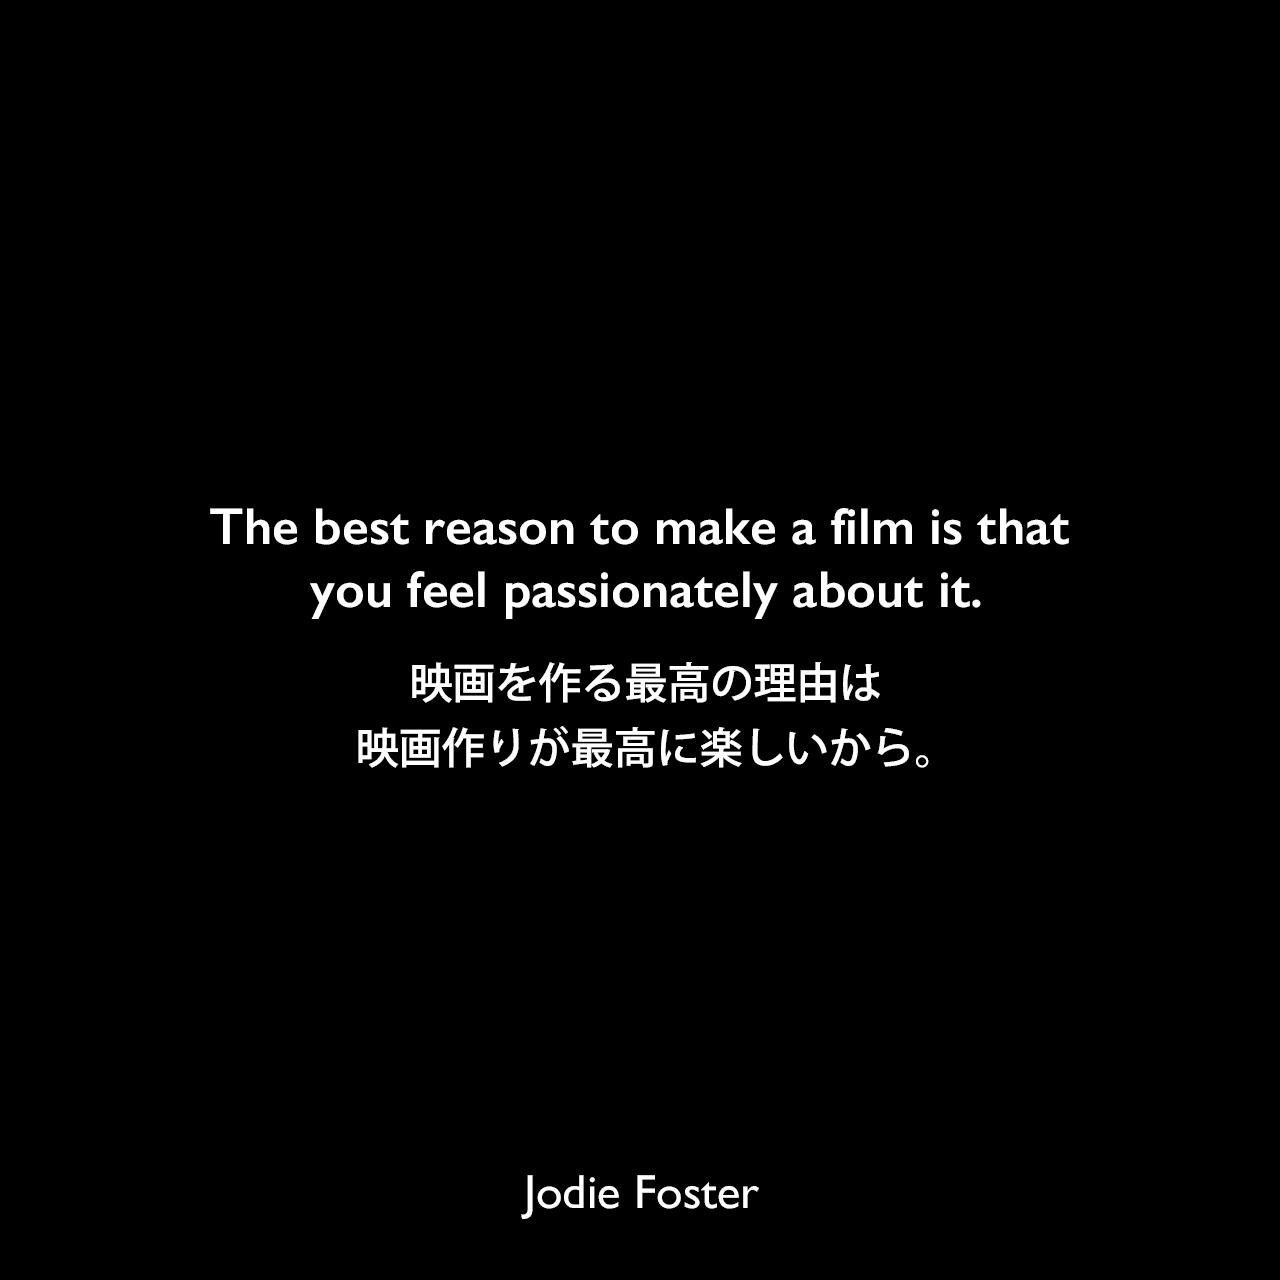 The best reason to make a film is that you feel passionately about it.映画を作る最高の理由は、映画作りが最高に楽しいから。Jodie Foster